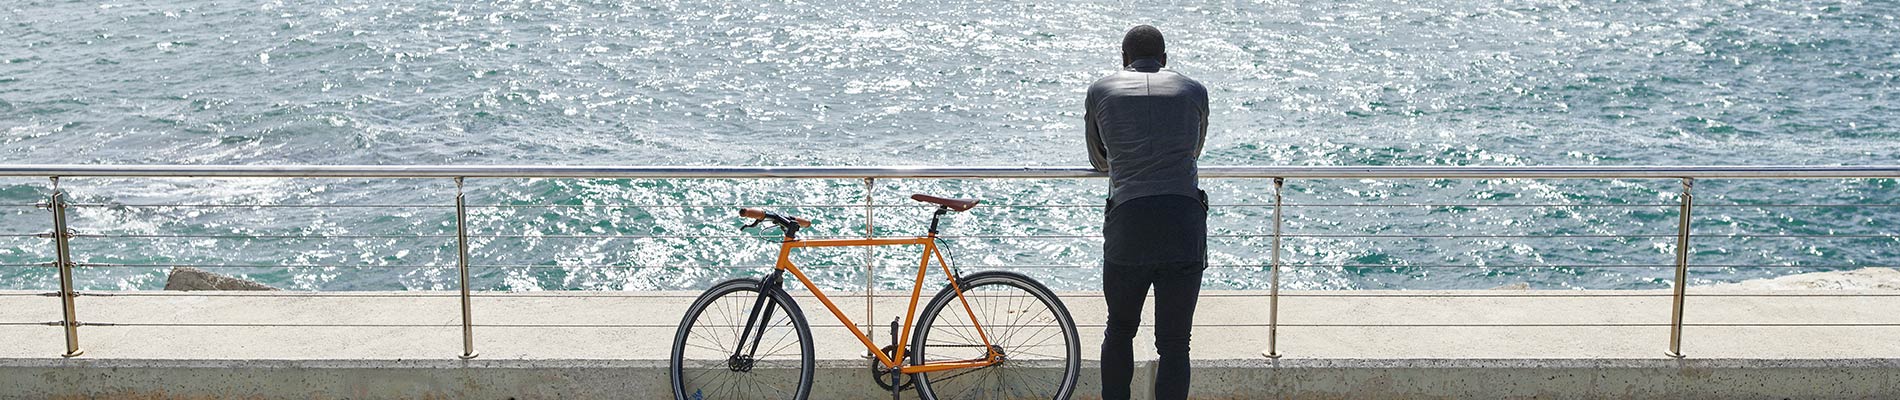 A man standing near his bike at a railing overlooking a body of water